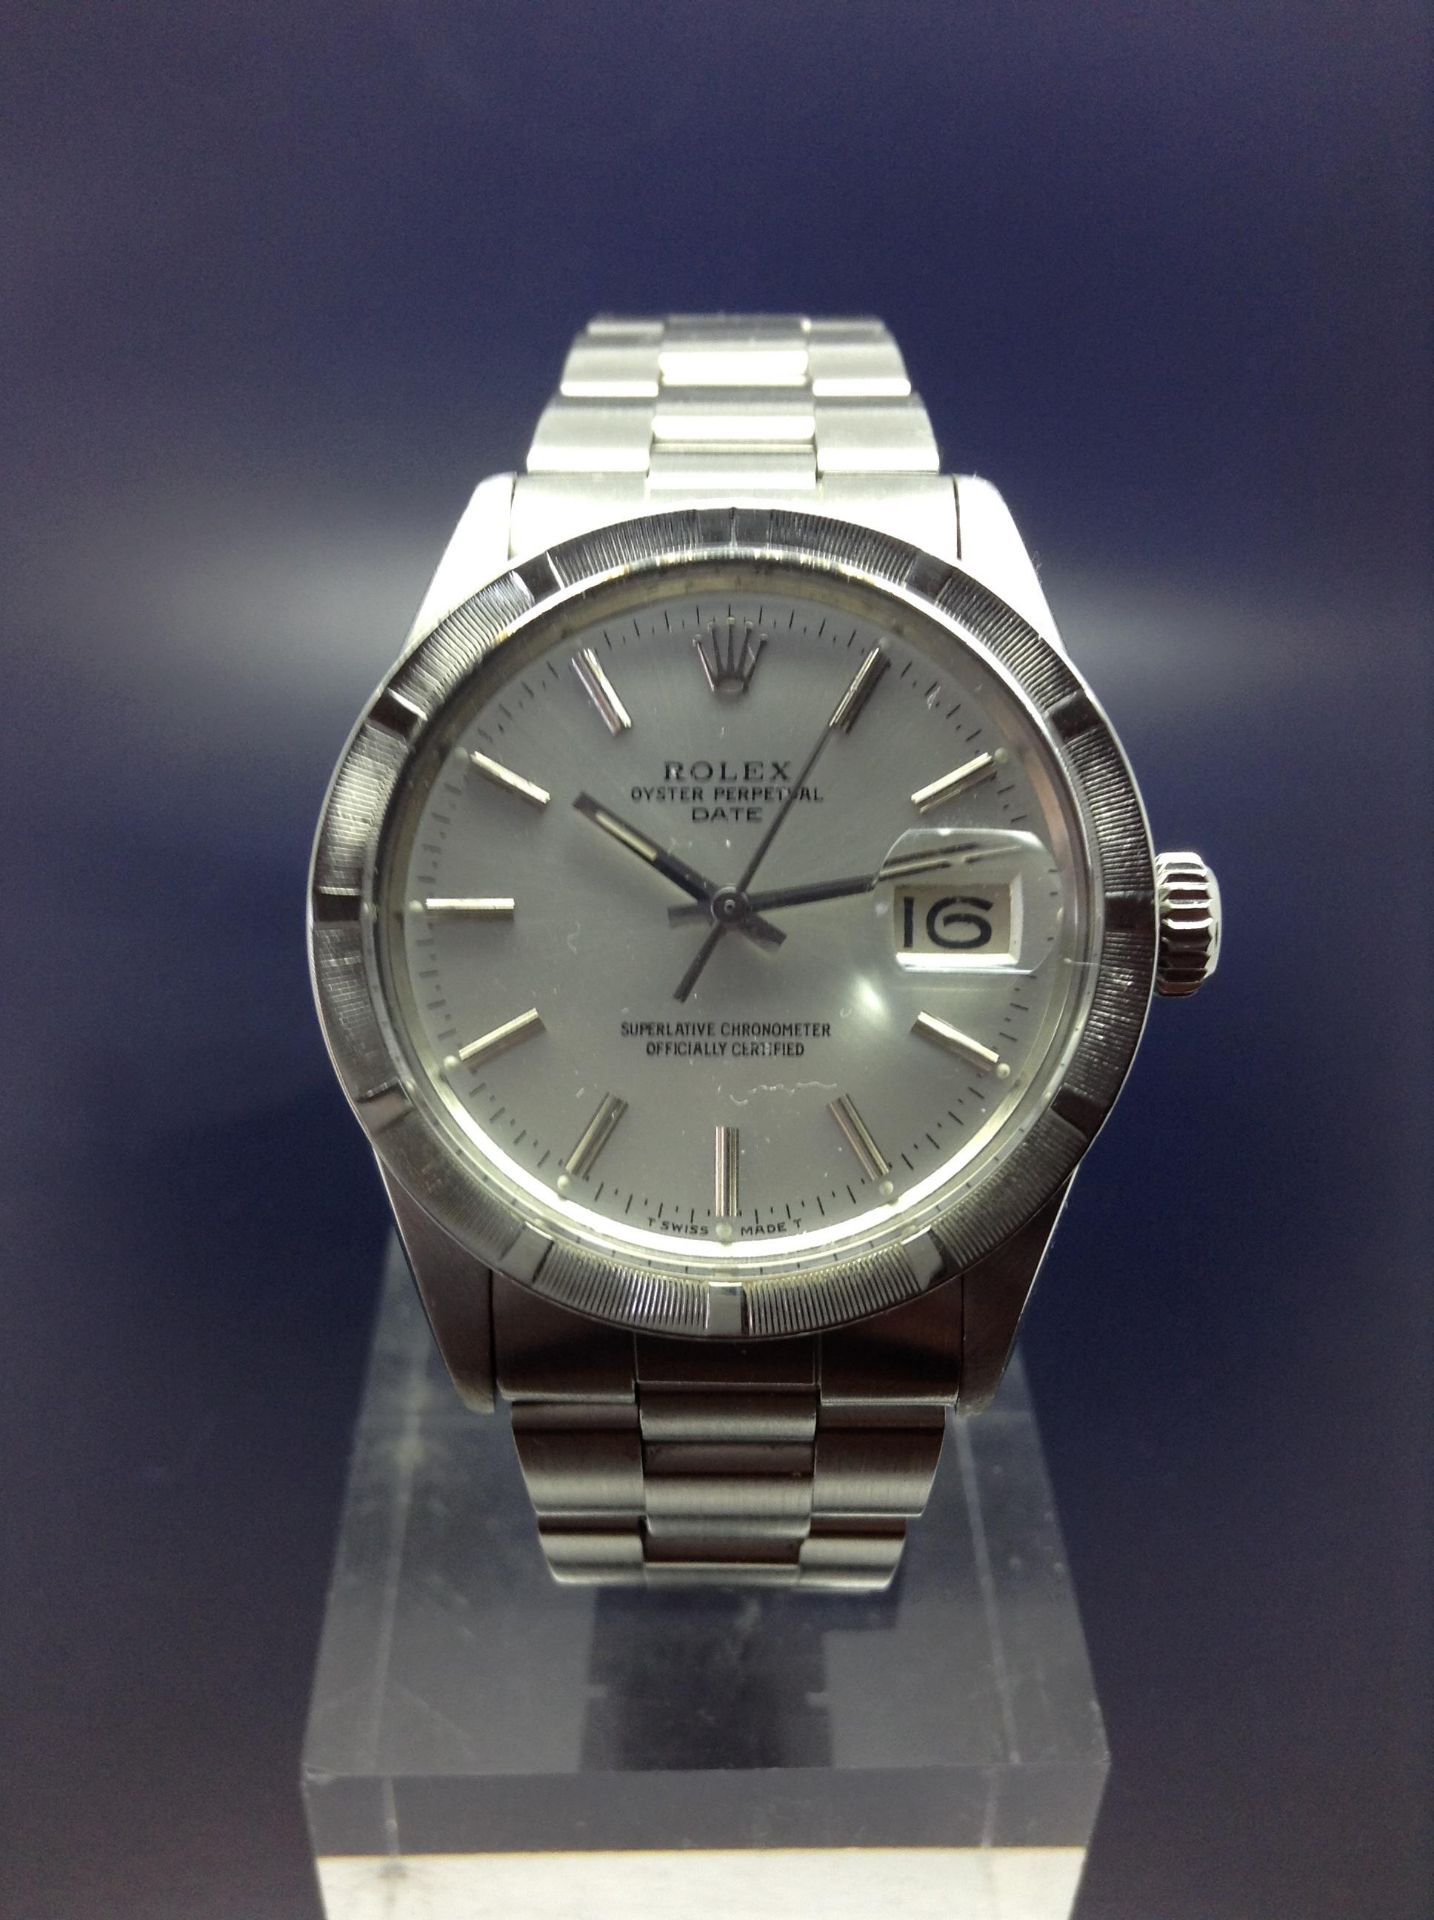 1969 ROLEX OYSTER DATE PERPETUAL CHRONOMETER STAINLESS STEEL GENTS WRIST WATCH - Image 3 of 4